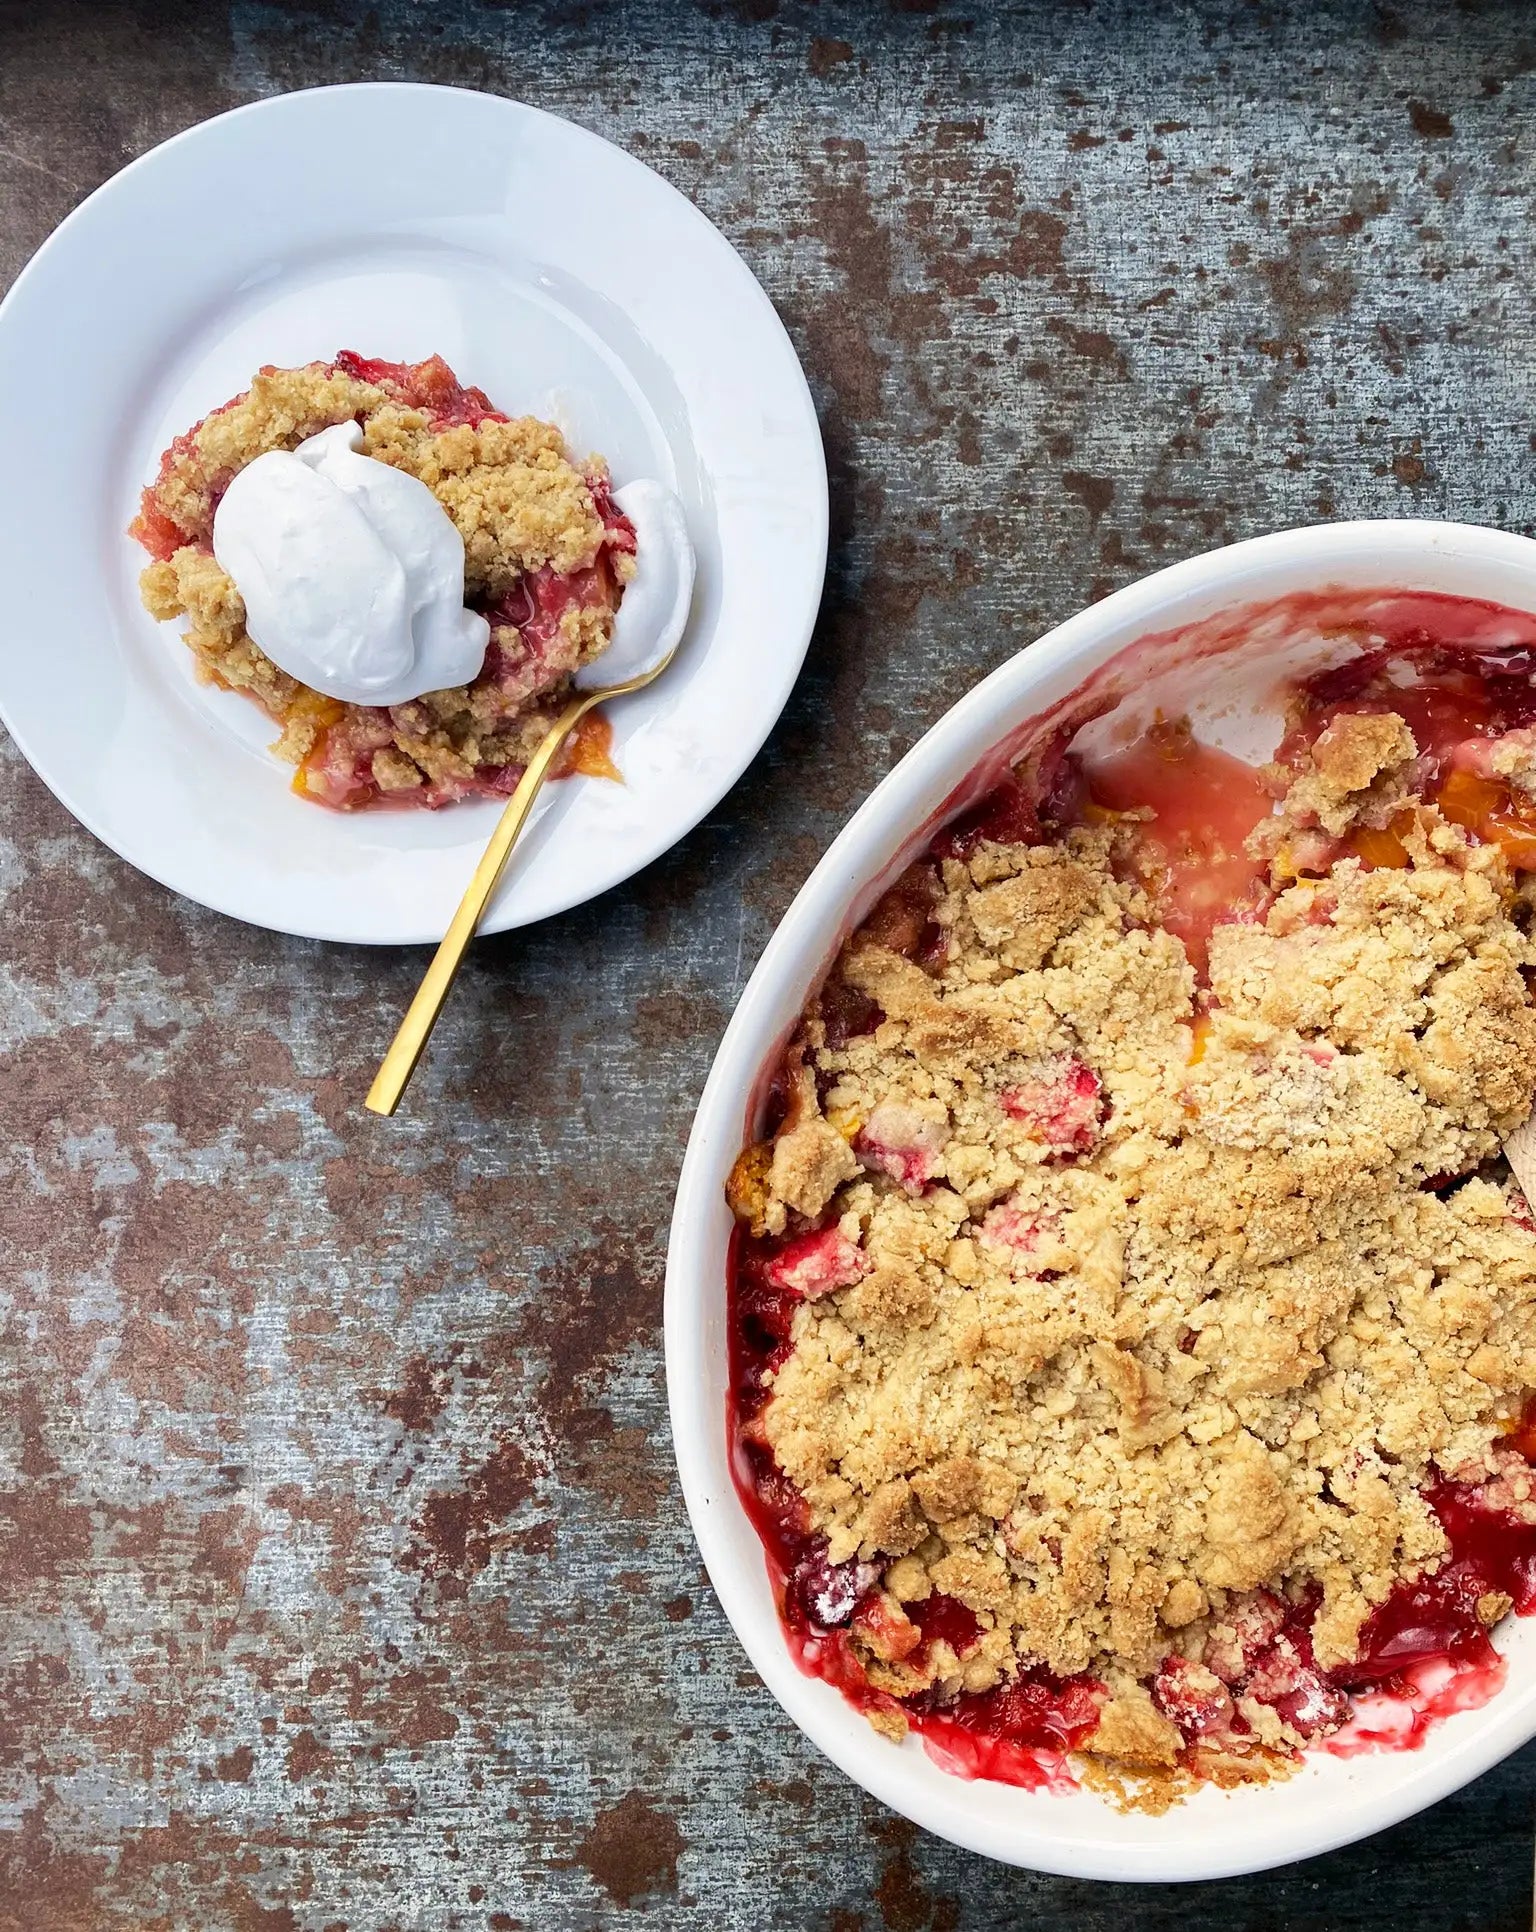  or Baked Fruit Crumble with Coconut Whip